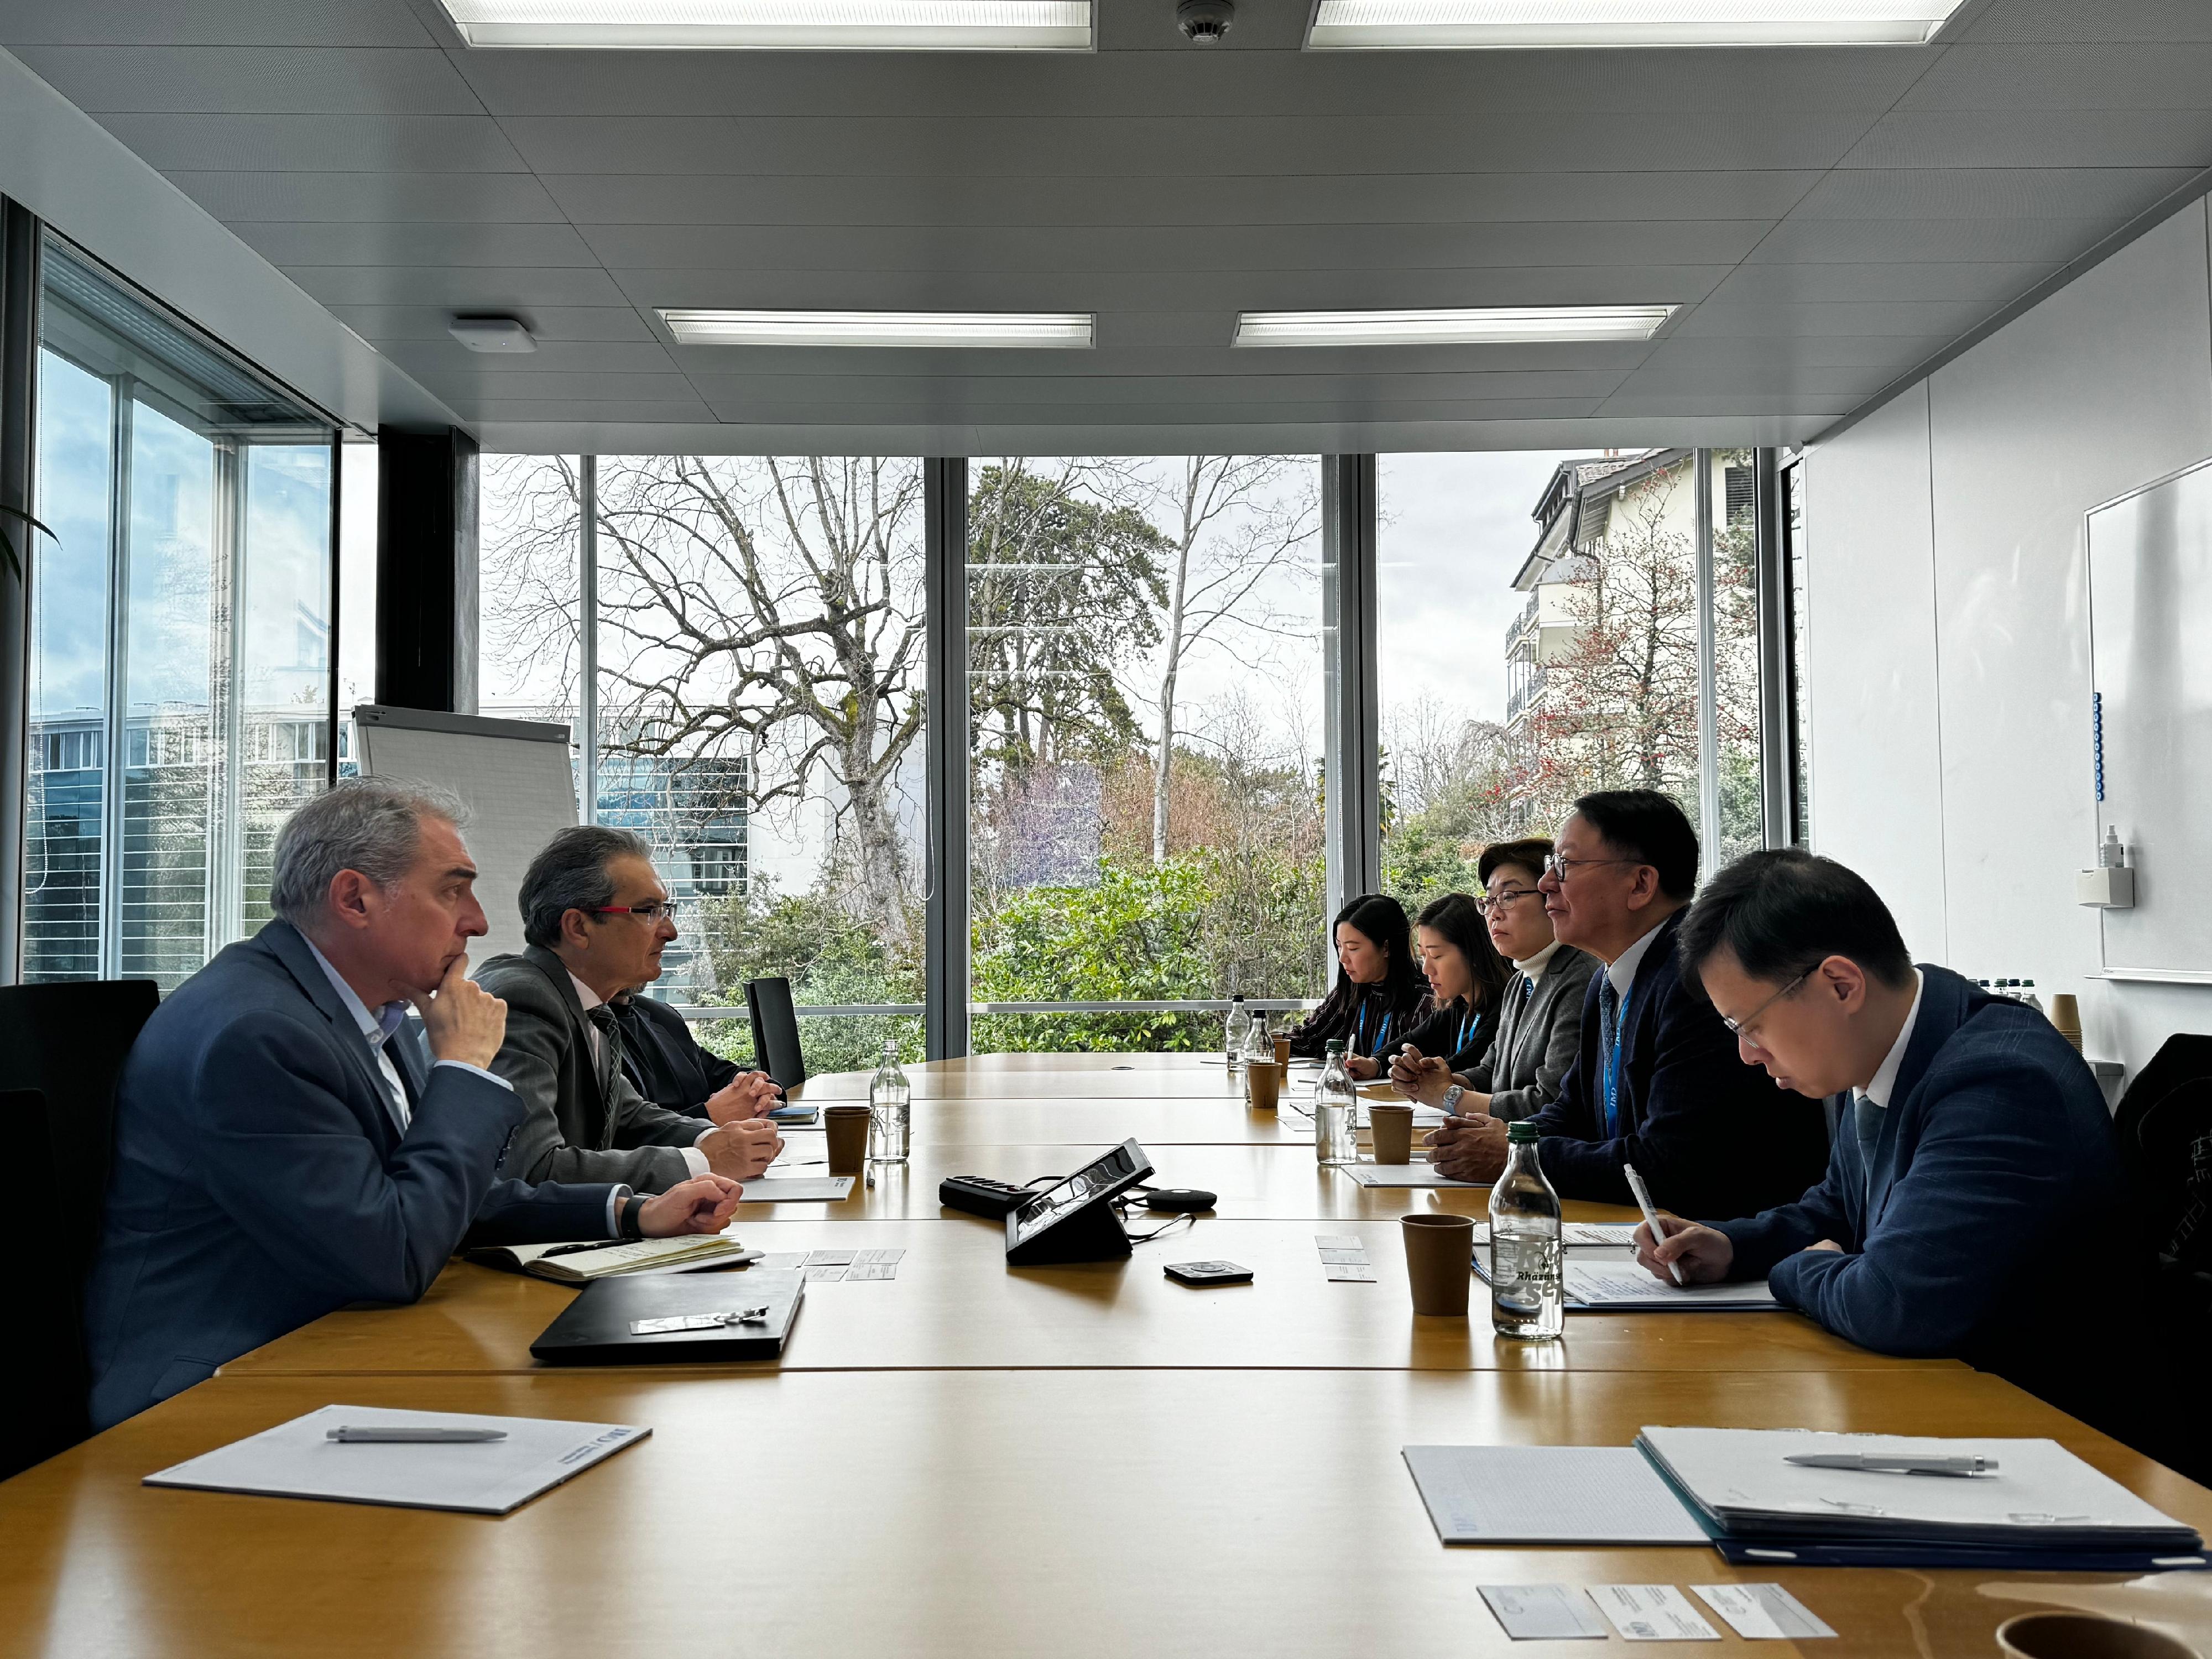 The Chief Secretary for Administration, Mr Chan Kwok-ki (second right), visits the International Institute for Management Development (IMD) to meet with the Director of IMD World Competitiveness Center, Professor Arturo Bris (second left), and other members of the Institute during his stay in Switzerland on January 24 (Geneva time).